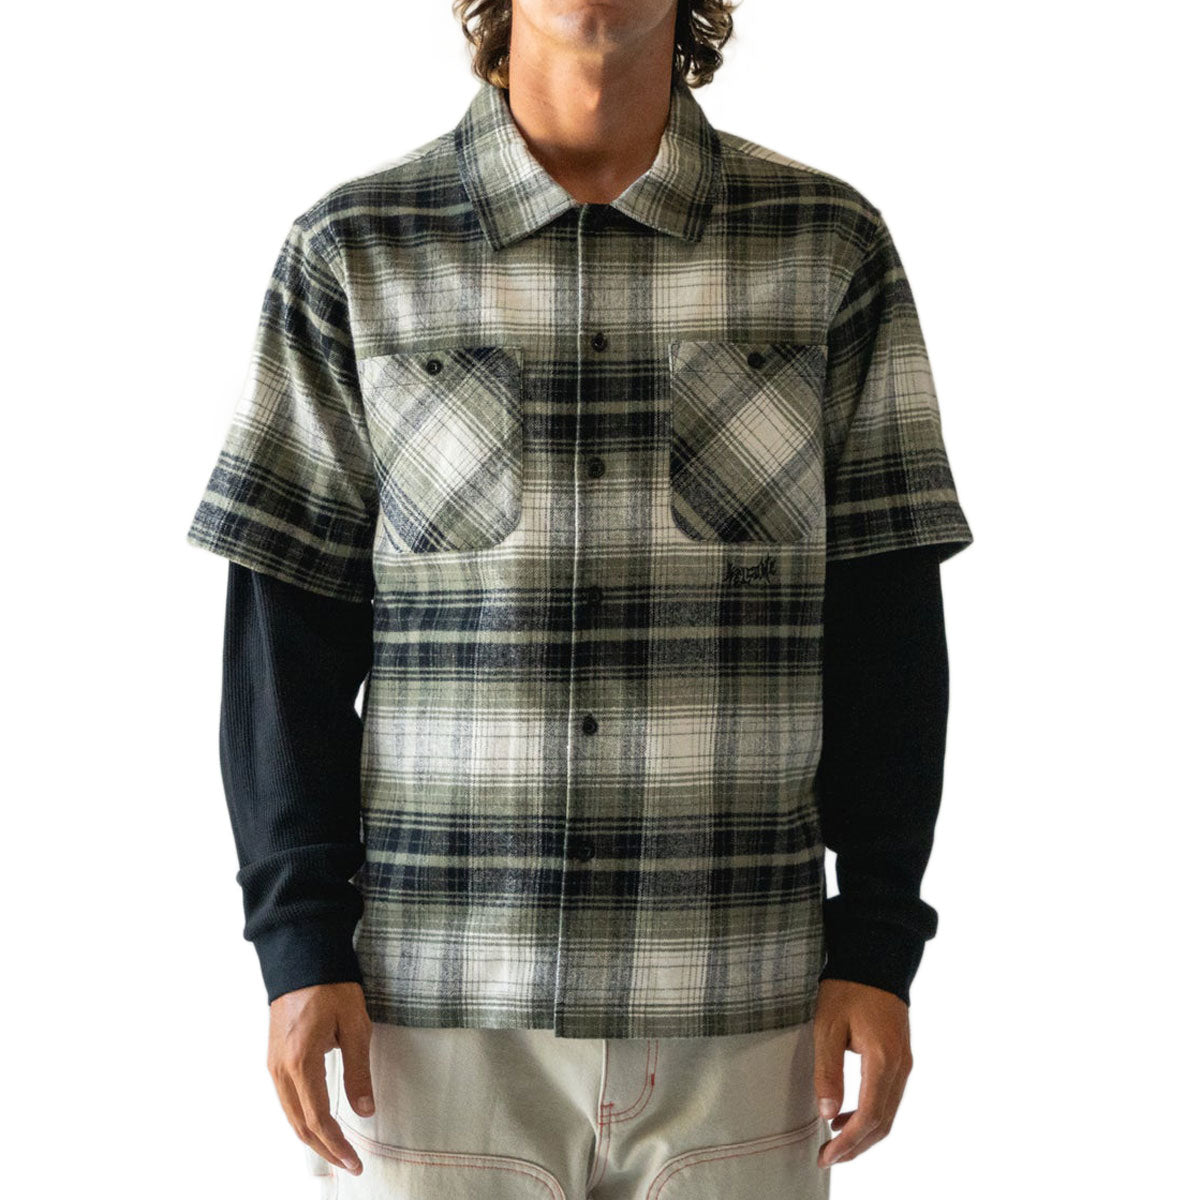 Welcome Lair Woven Plaid Thermal Shirt - Olive